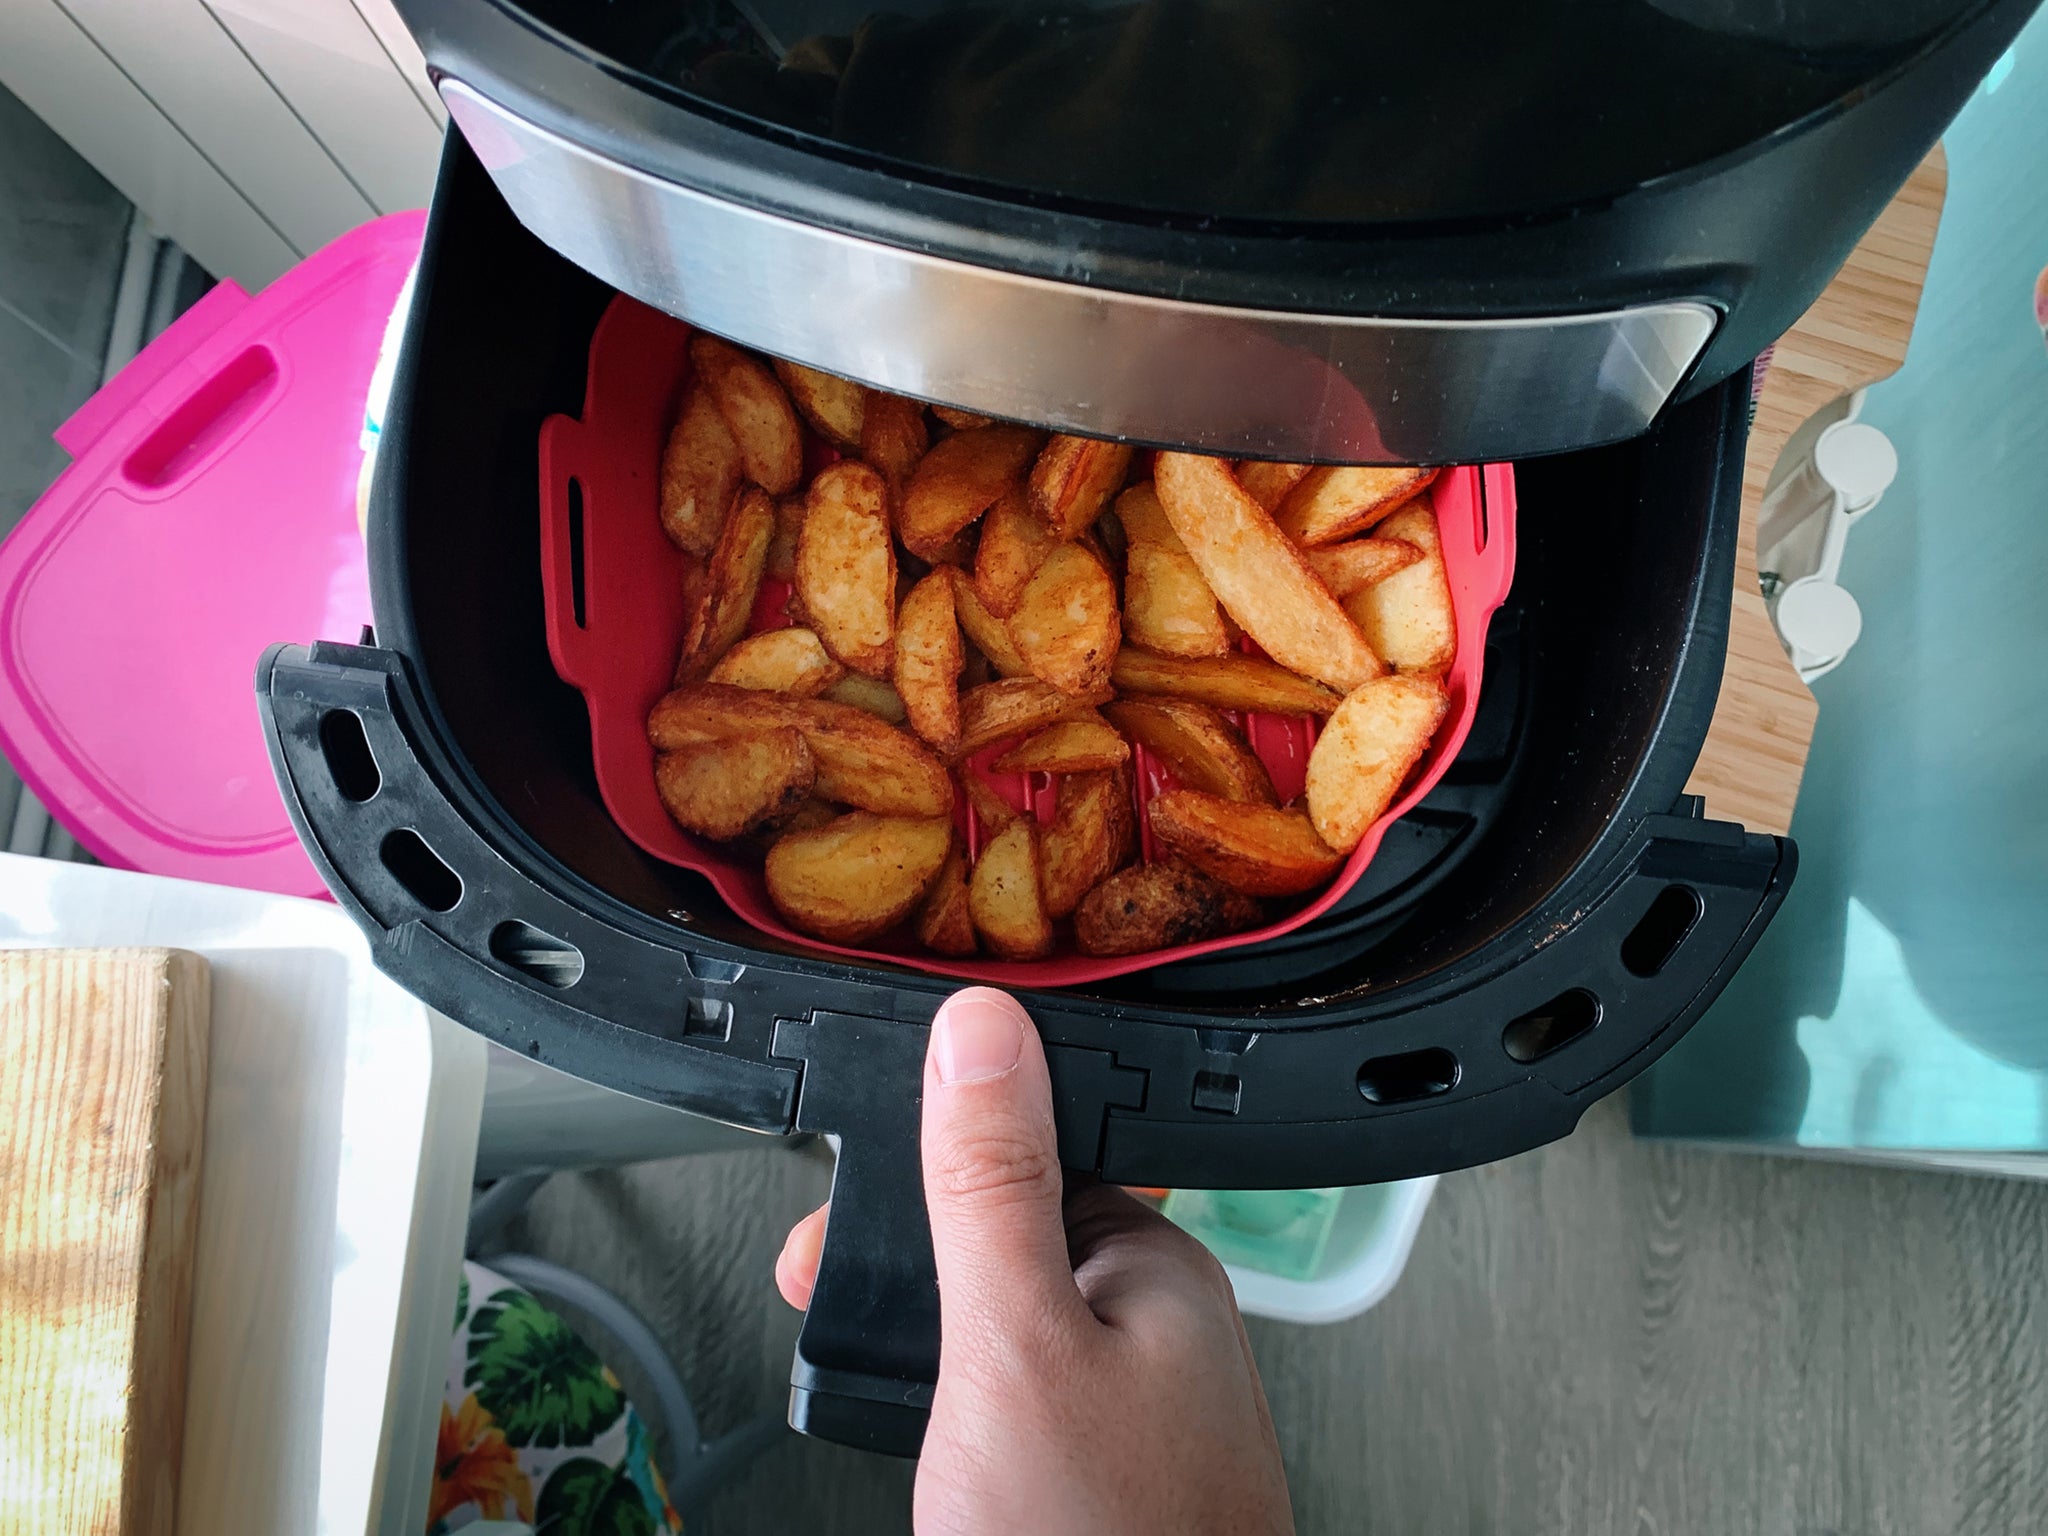 Homemade potato chips cooked to crispy perfection in the air fryer